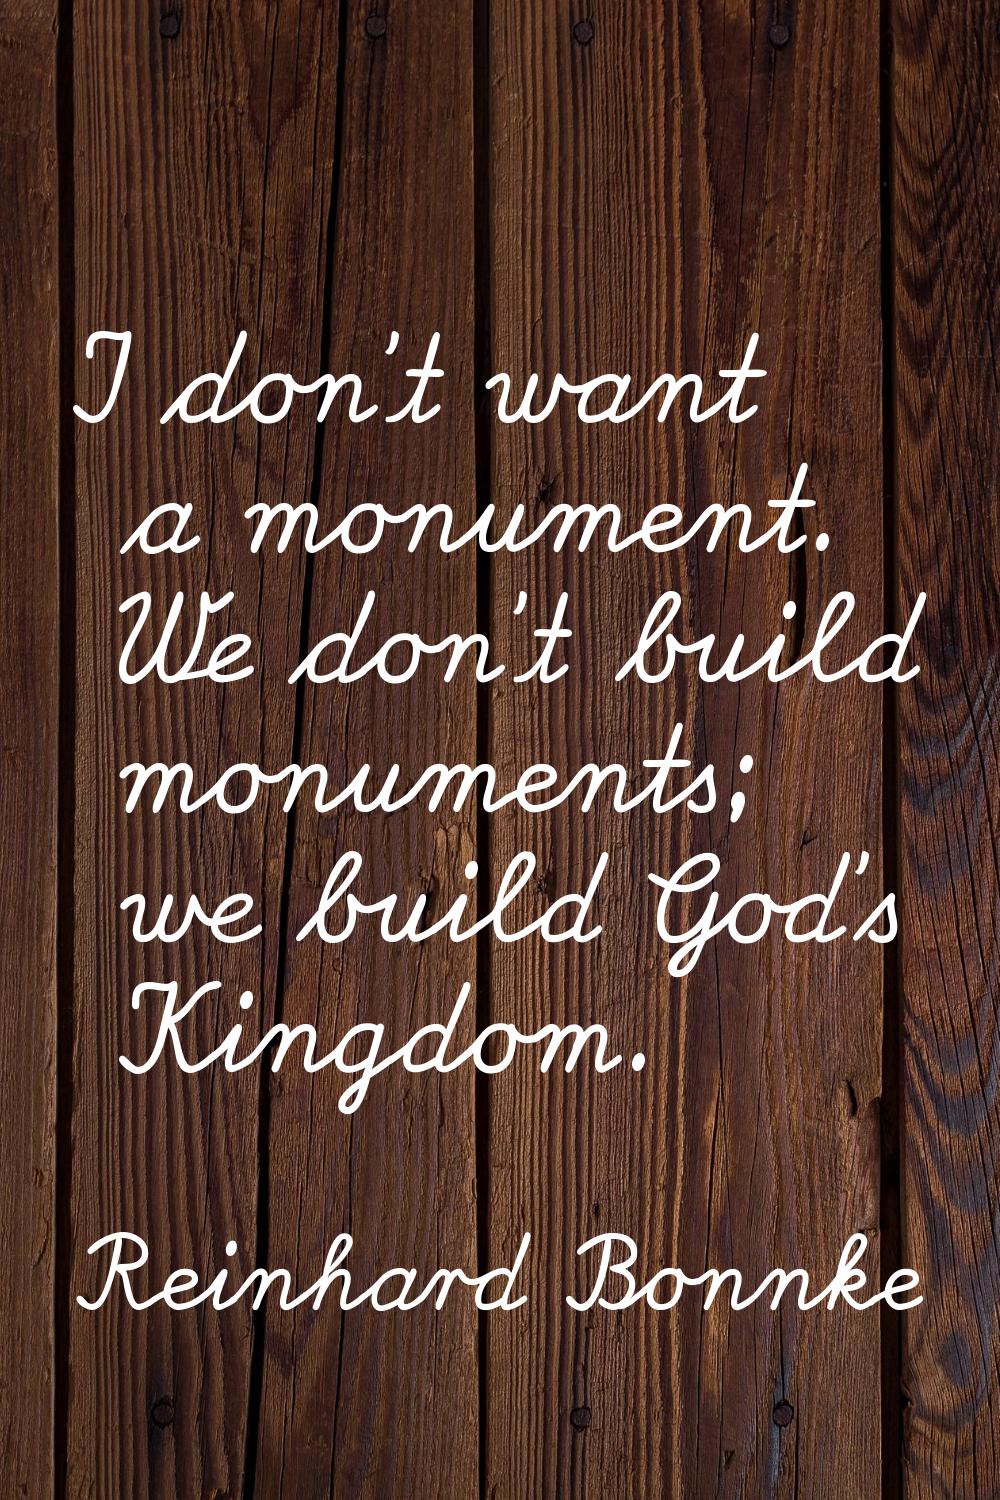 I don't want a monument. We don't build monuments; we build God's Kingdom.